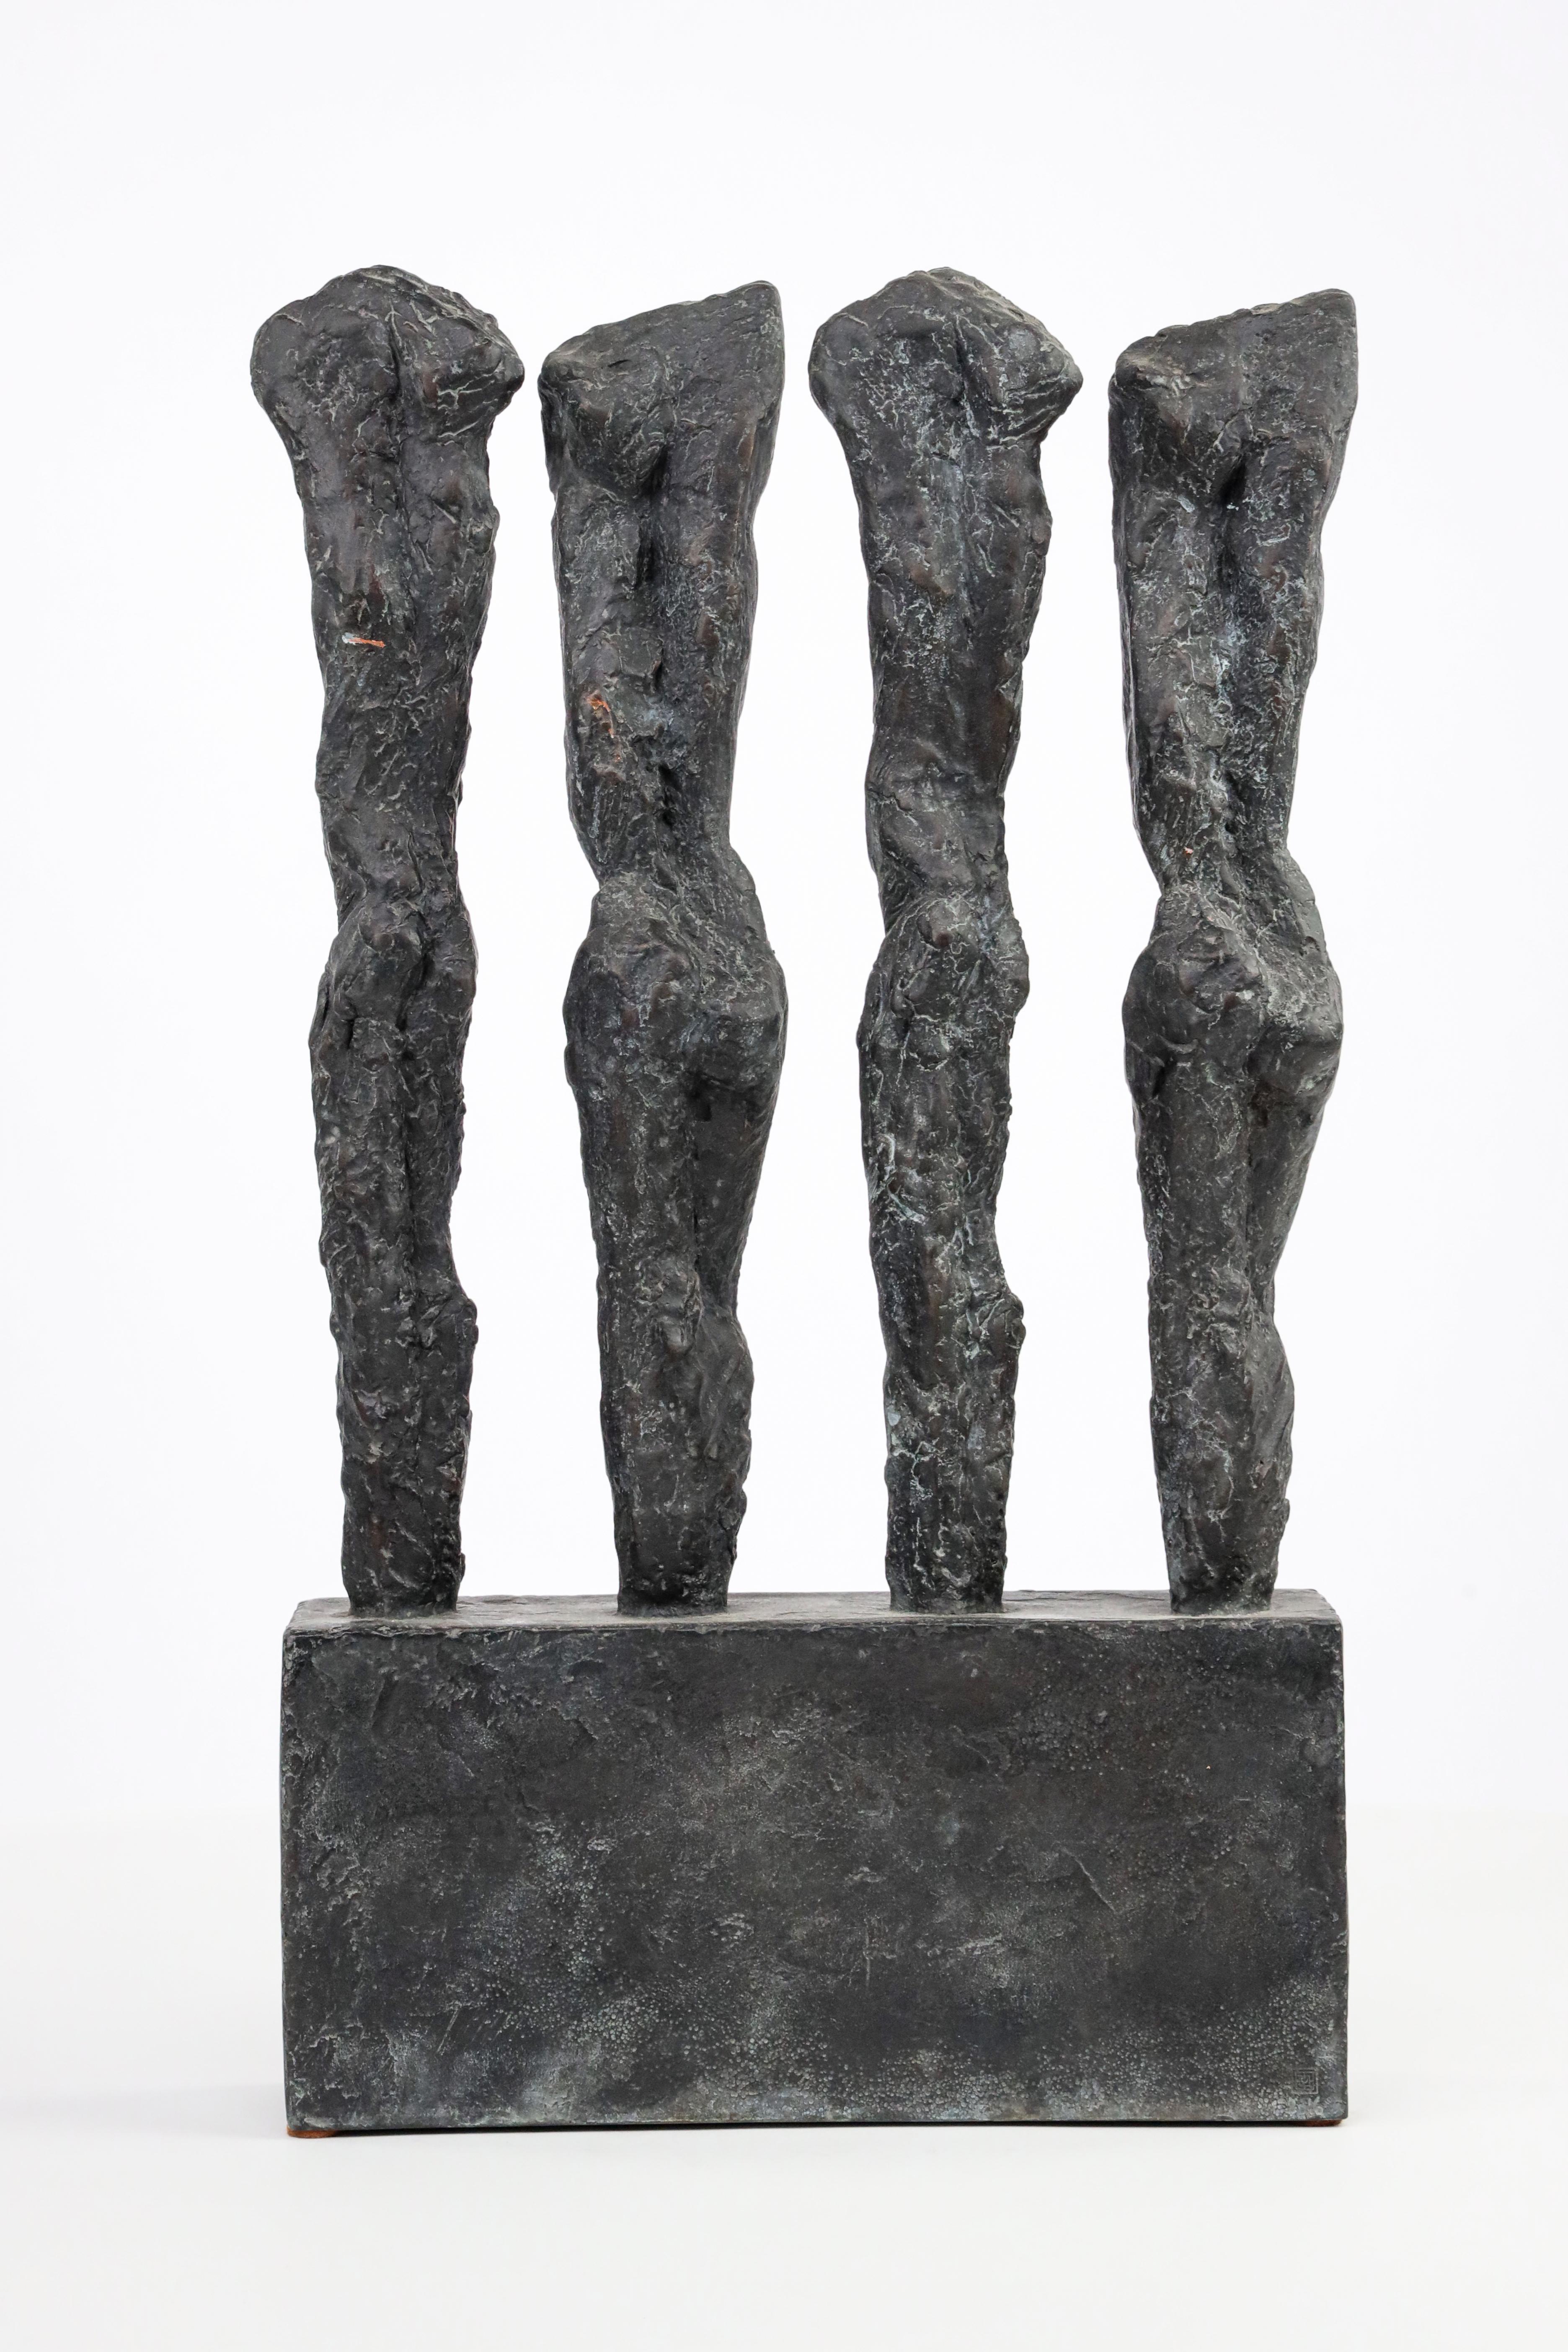 In Line by M. Demal - Bronze sculpture, group of female figures, semi-abstract - Contemporary Sculpture by Martine Demal